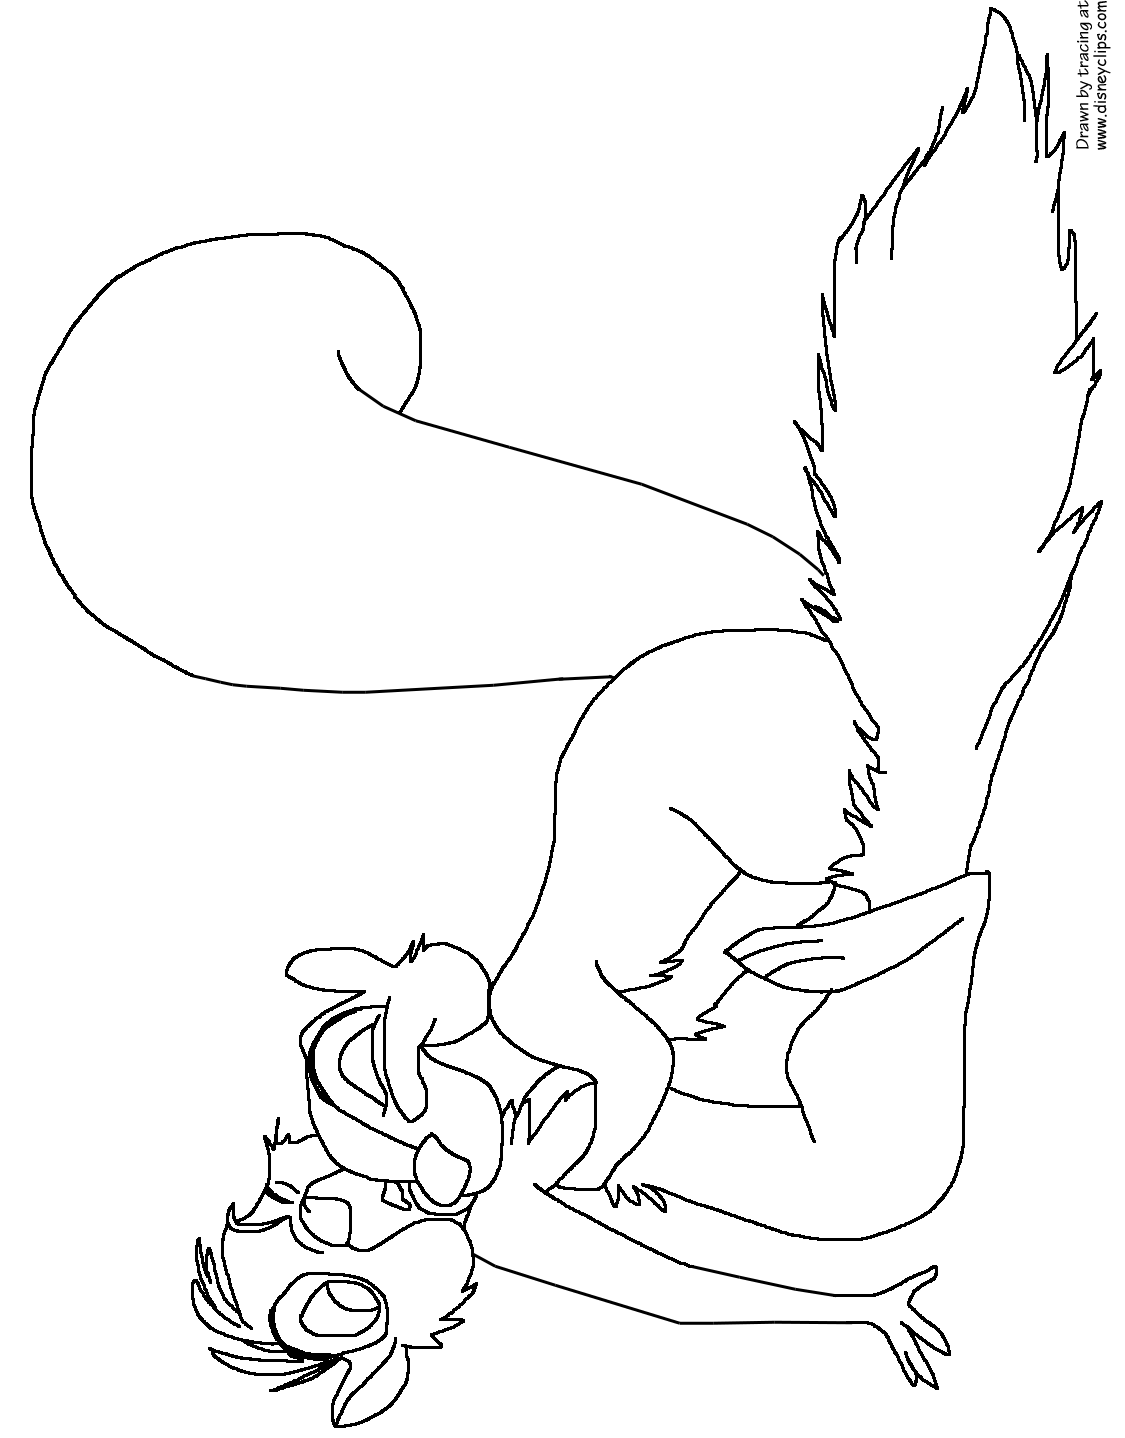 zelda sword in the stone coloring pages - photo #22